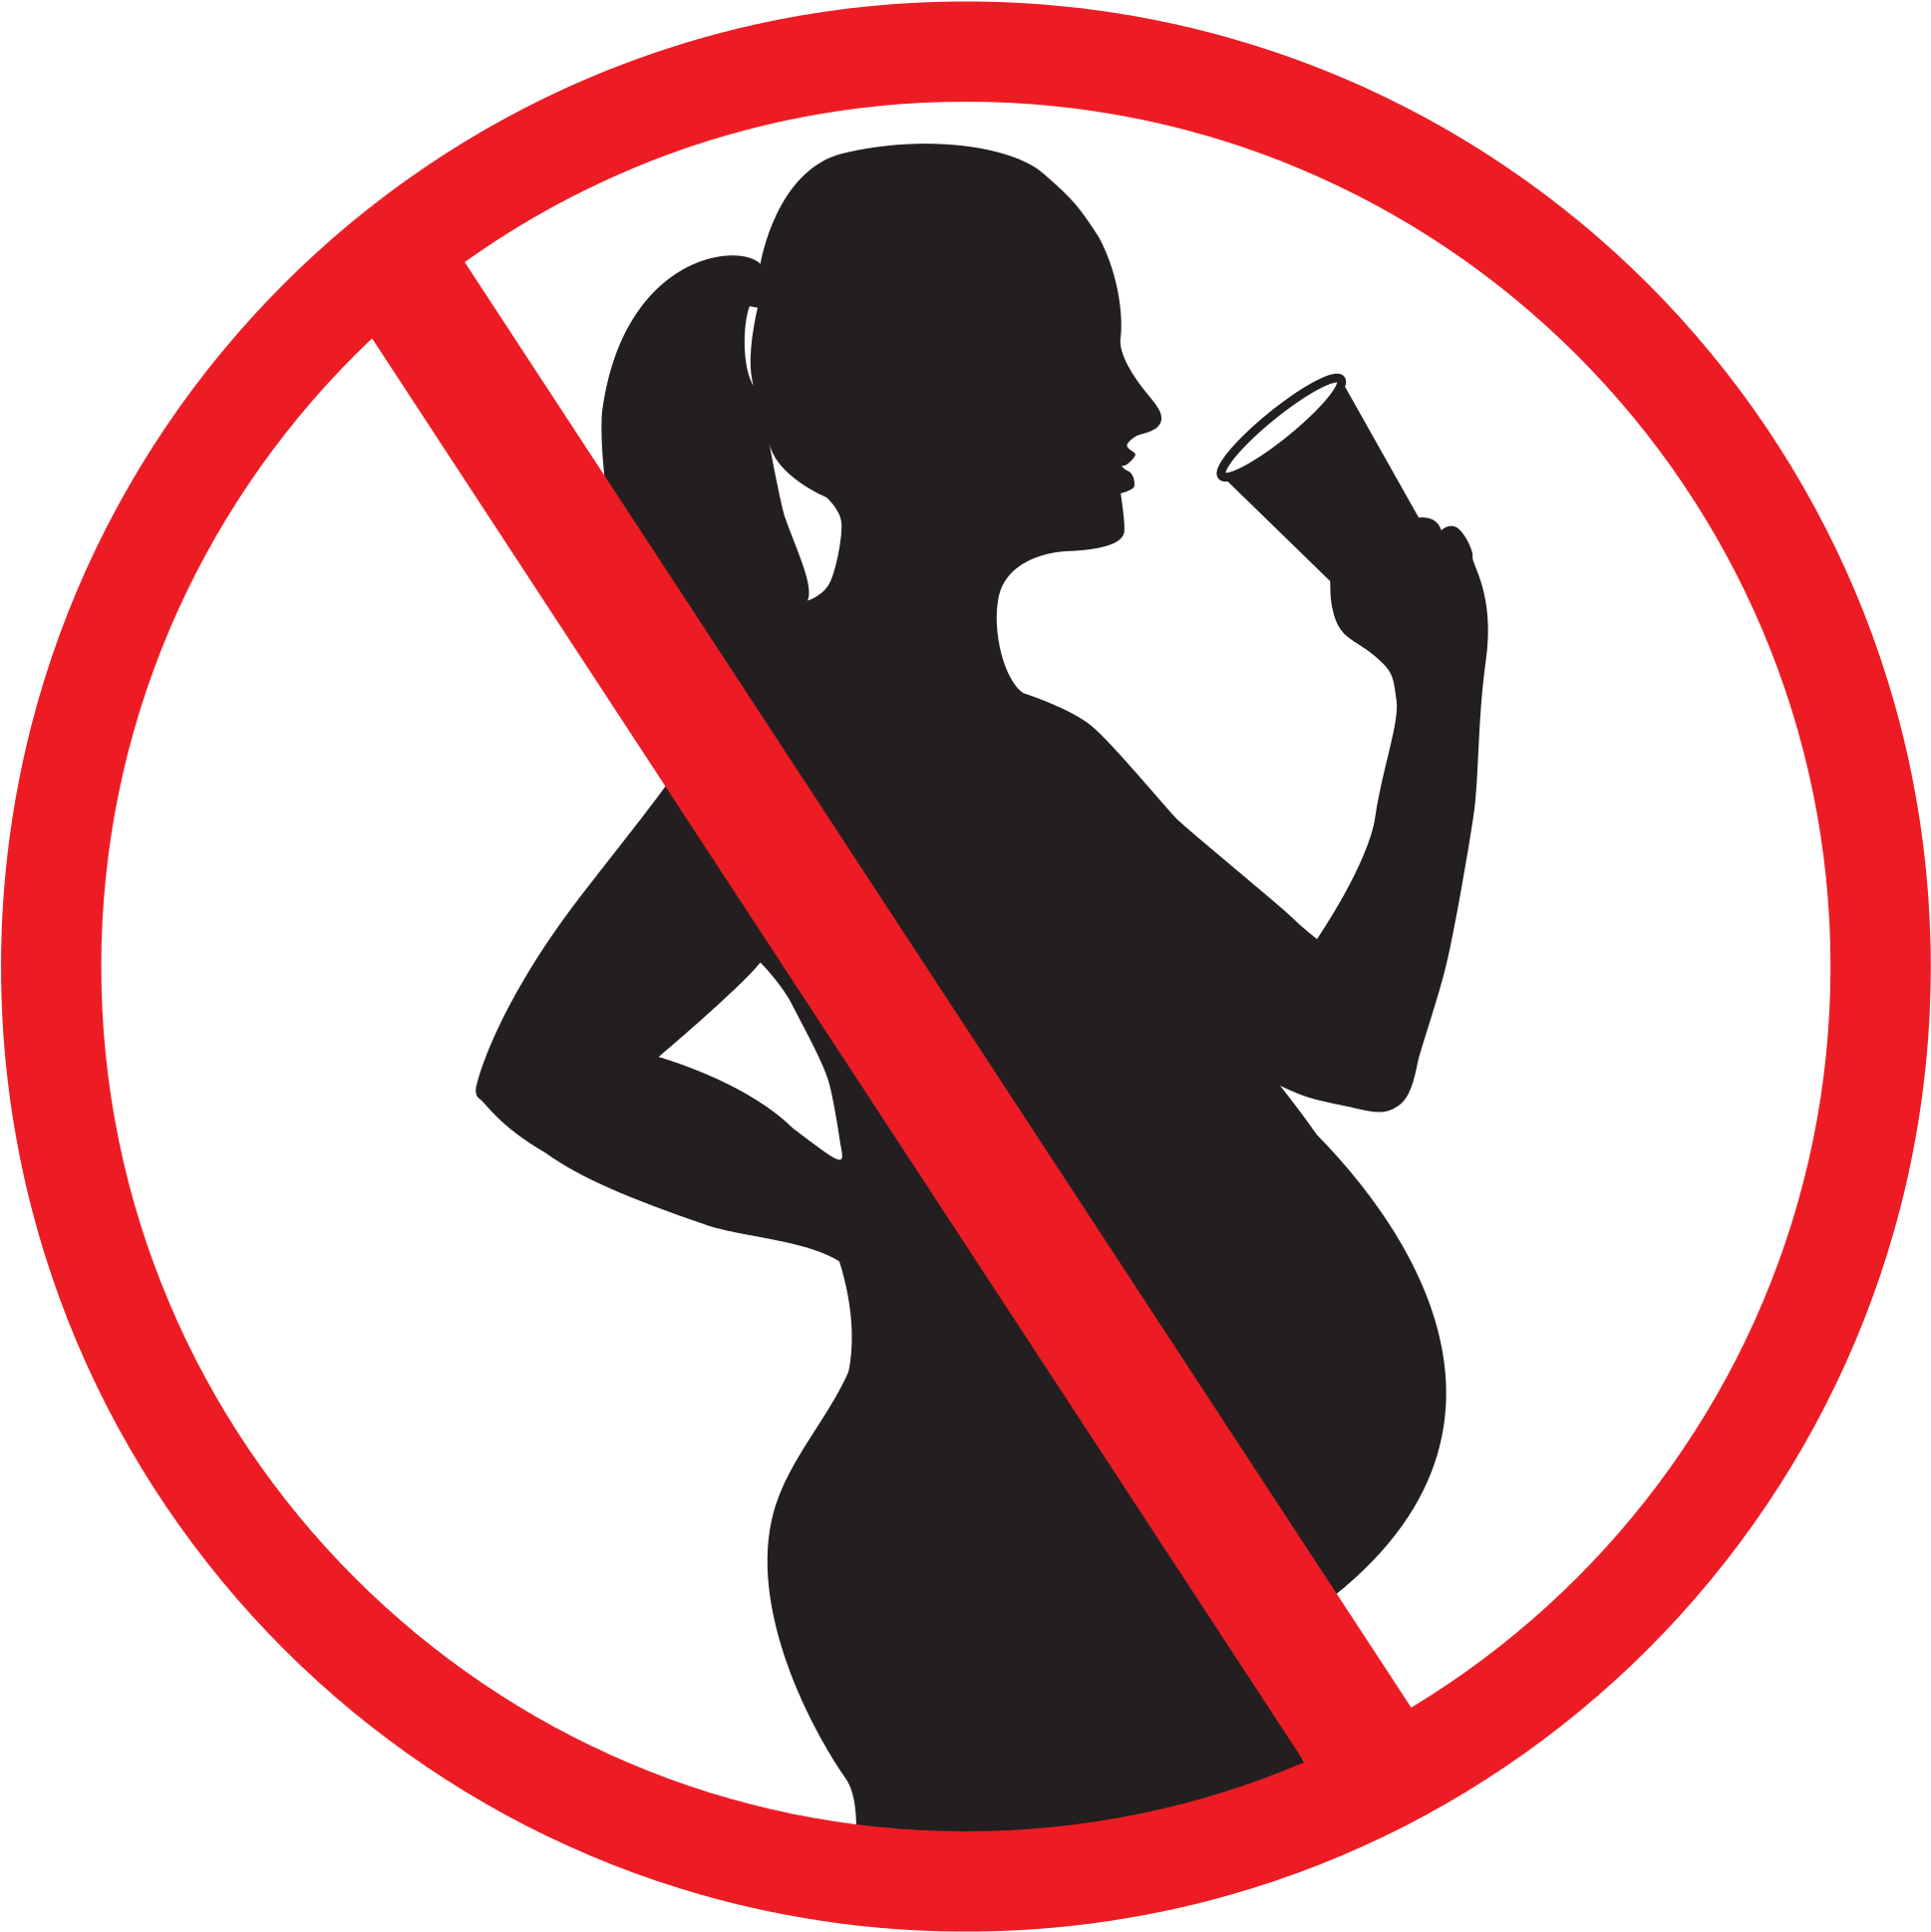 No Alcohol - Do Not Drink While Pregnant (2000x2029)